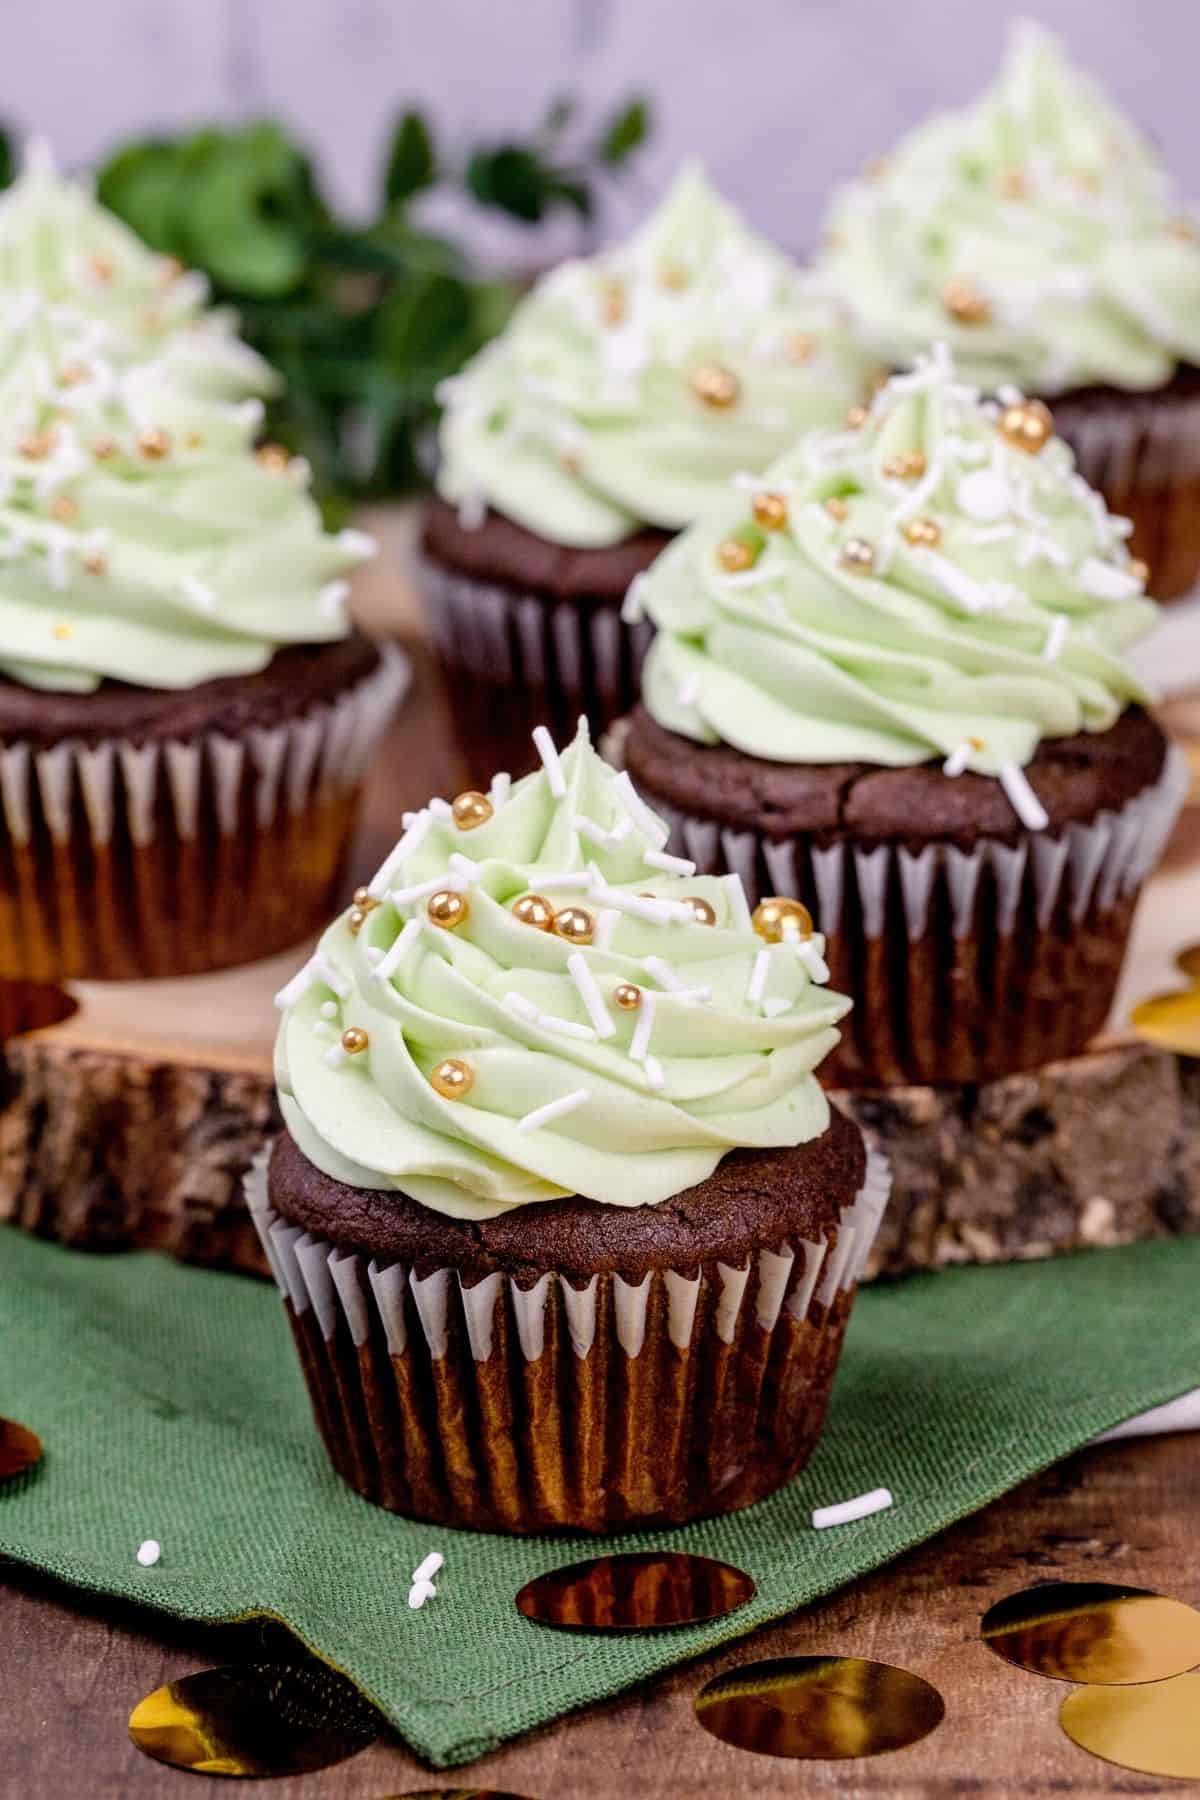 Many chocolate cupcakes with green mint frosting and gold and white sprinkles. One is on a green napkin and more are on a sliced wood platter. Sprinkles and gold foil confetti are scattered around the scene.